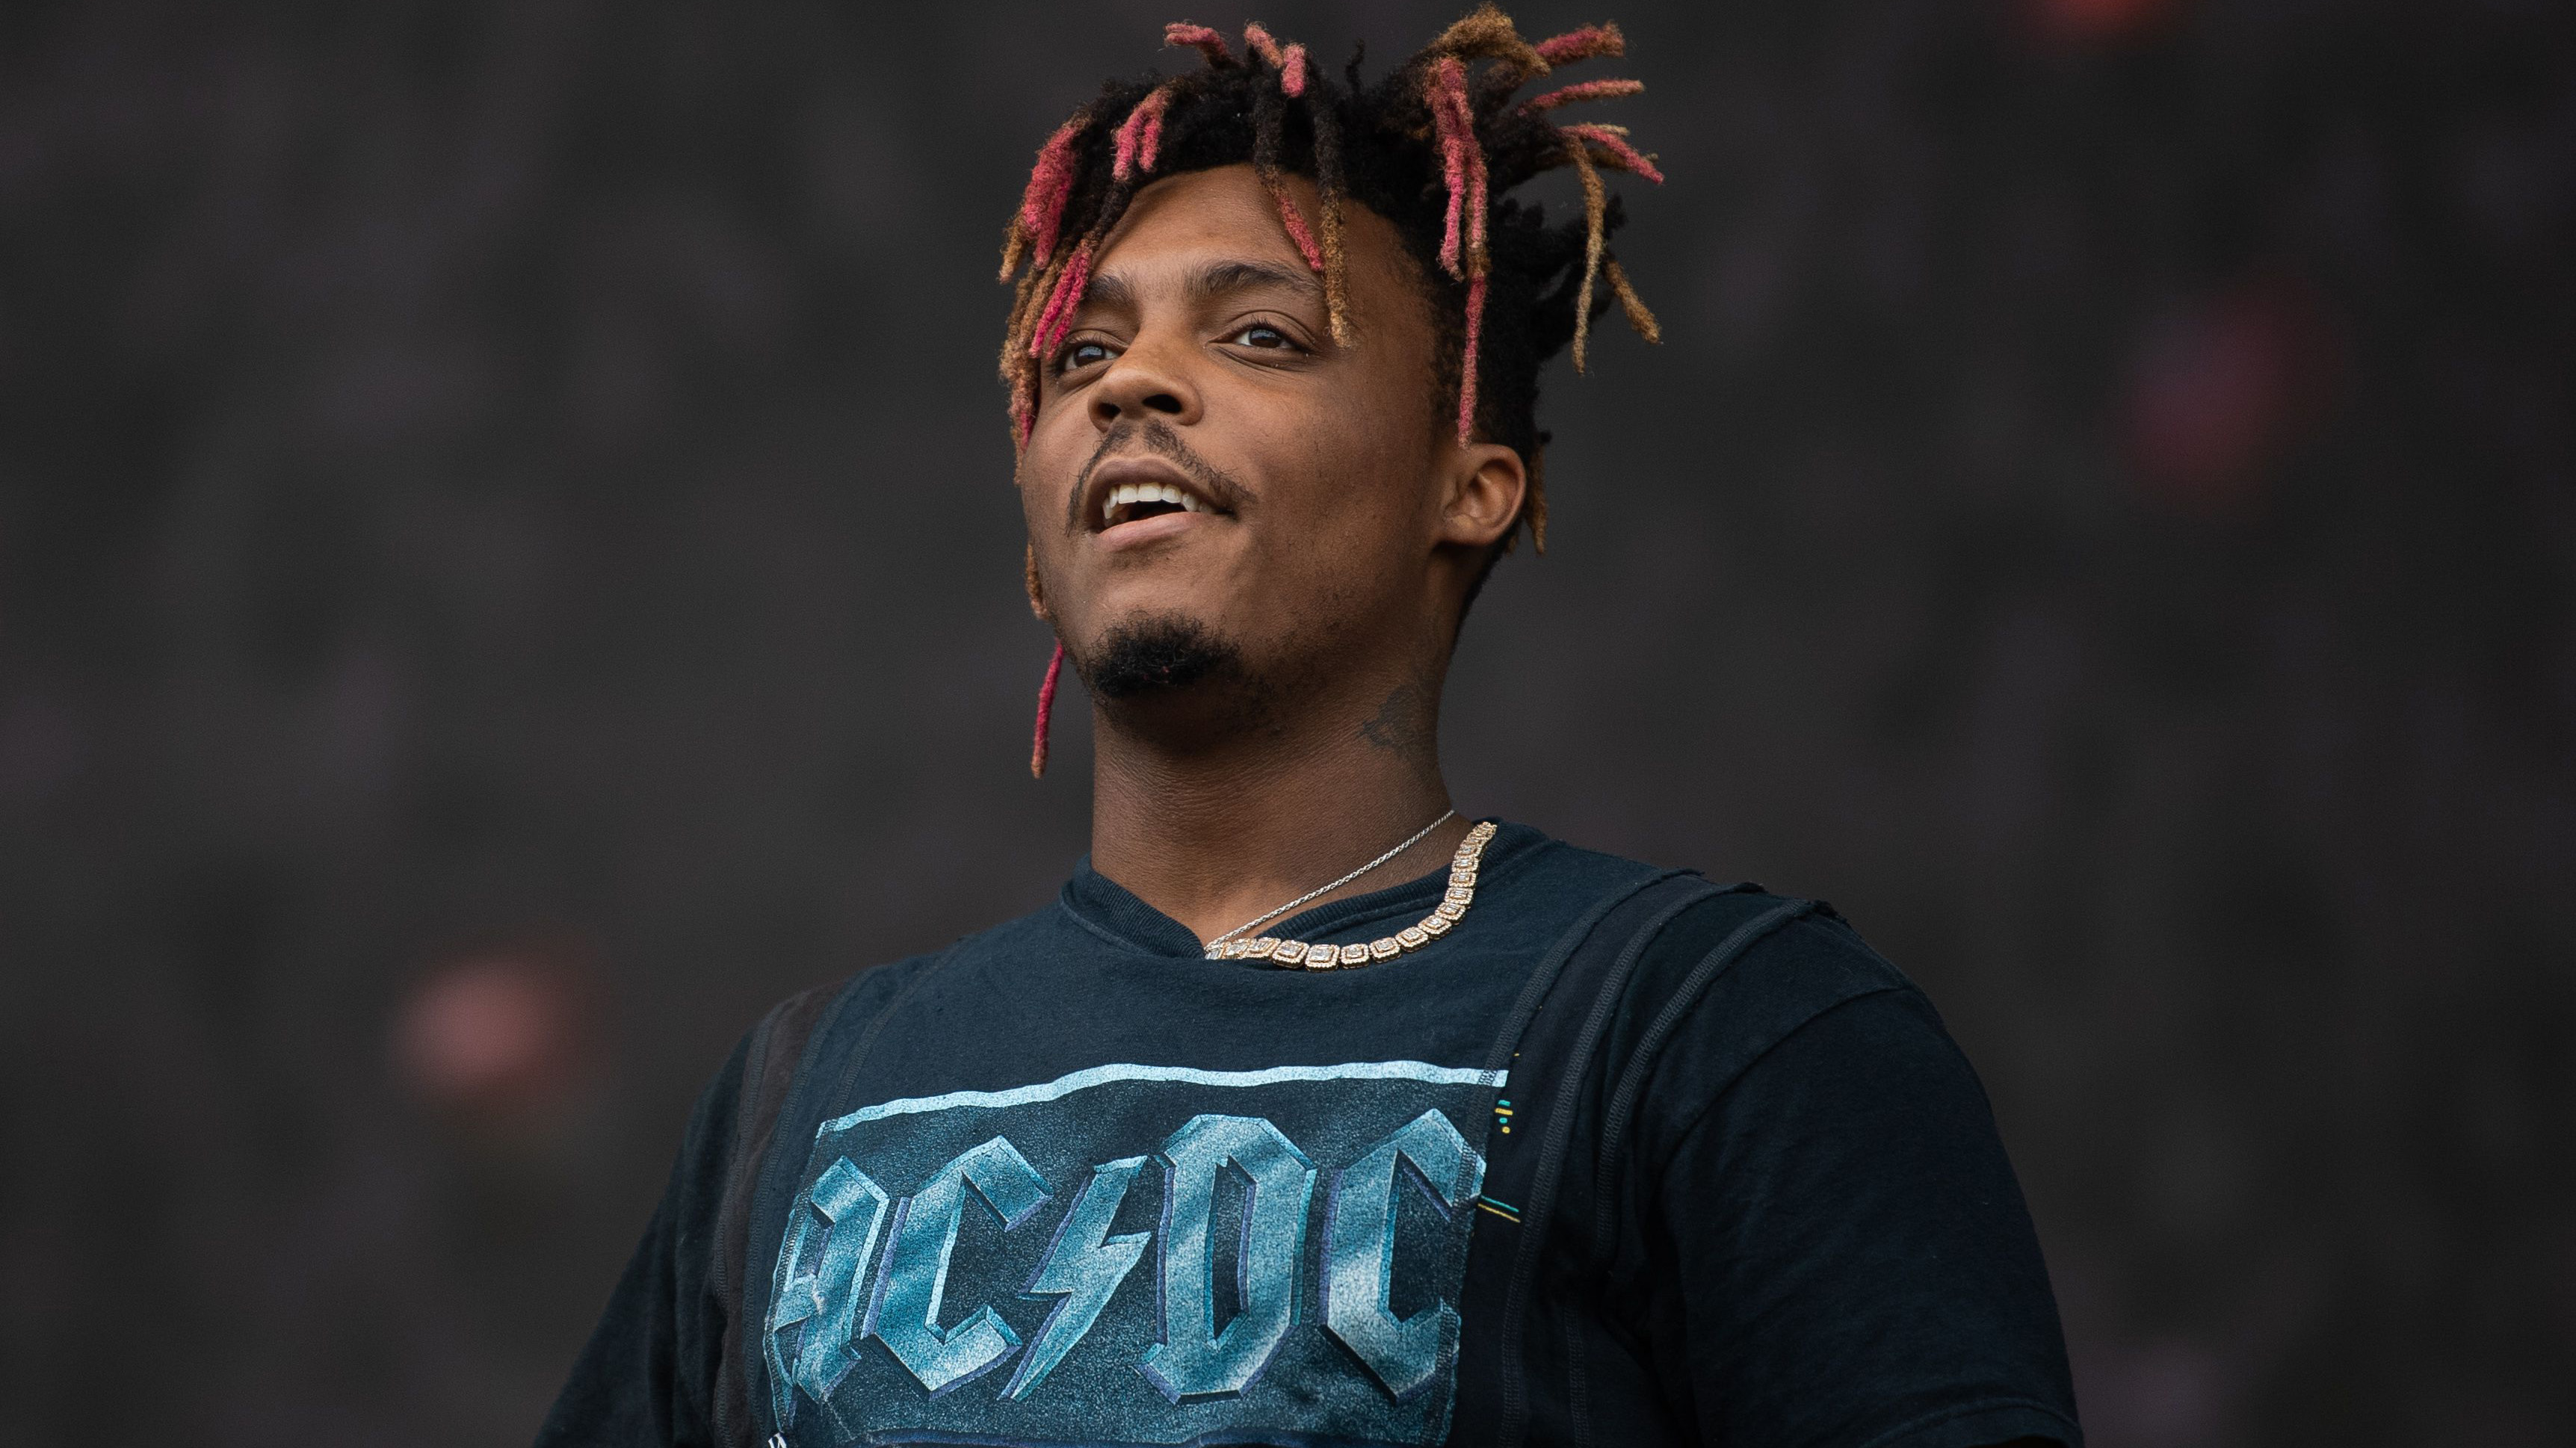 juice wrld 1080P 2k 4k HD wallpapers backgrounds free download  Rare  Gallery